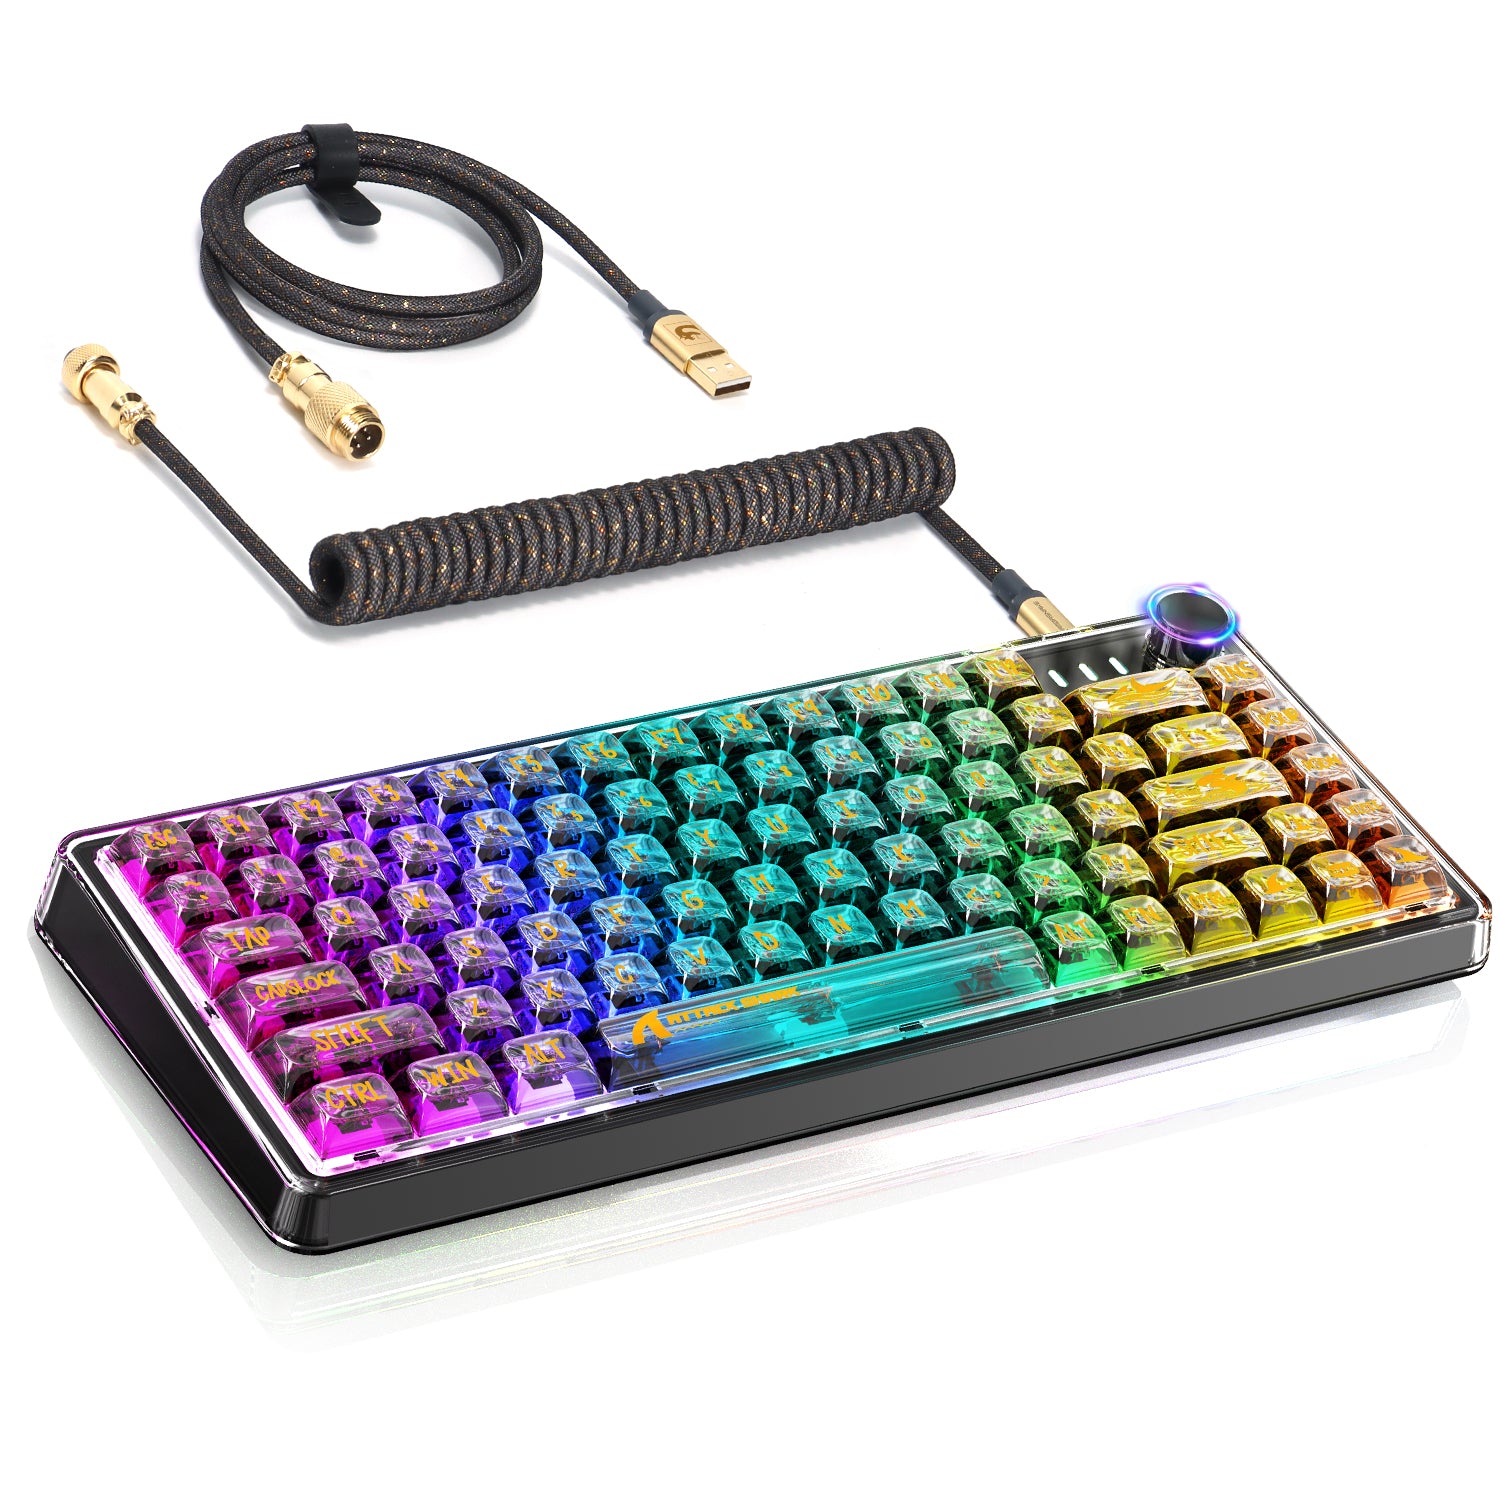 ATTACK SHARK K75 Mechanical Keyboard, Transparent PC Keycaps, Custom RGB Gaming Keyboard, Gasket QMK/VIA Keyboard, Linear Switch, Coiled Cable, TKL Hot Swappable Wired Keyboard for PC Gamer